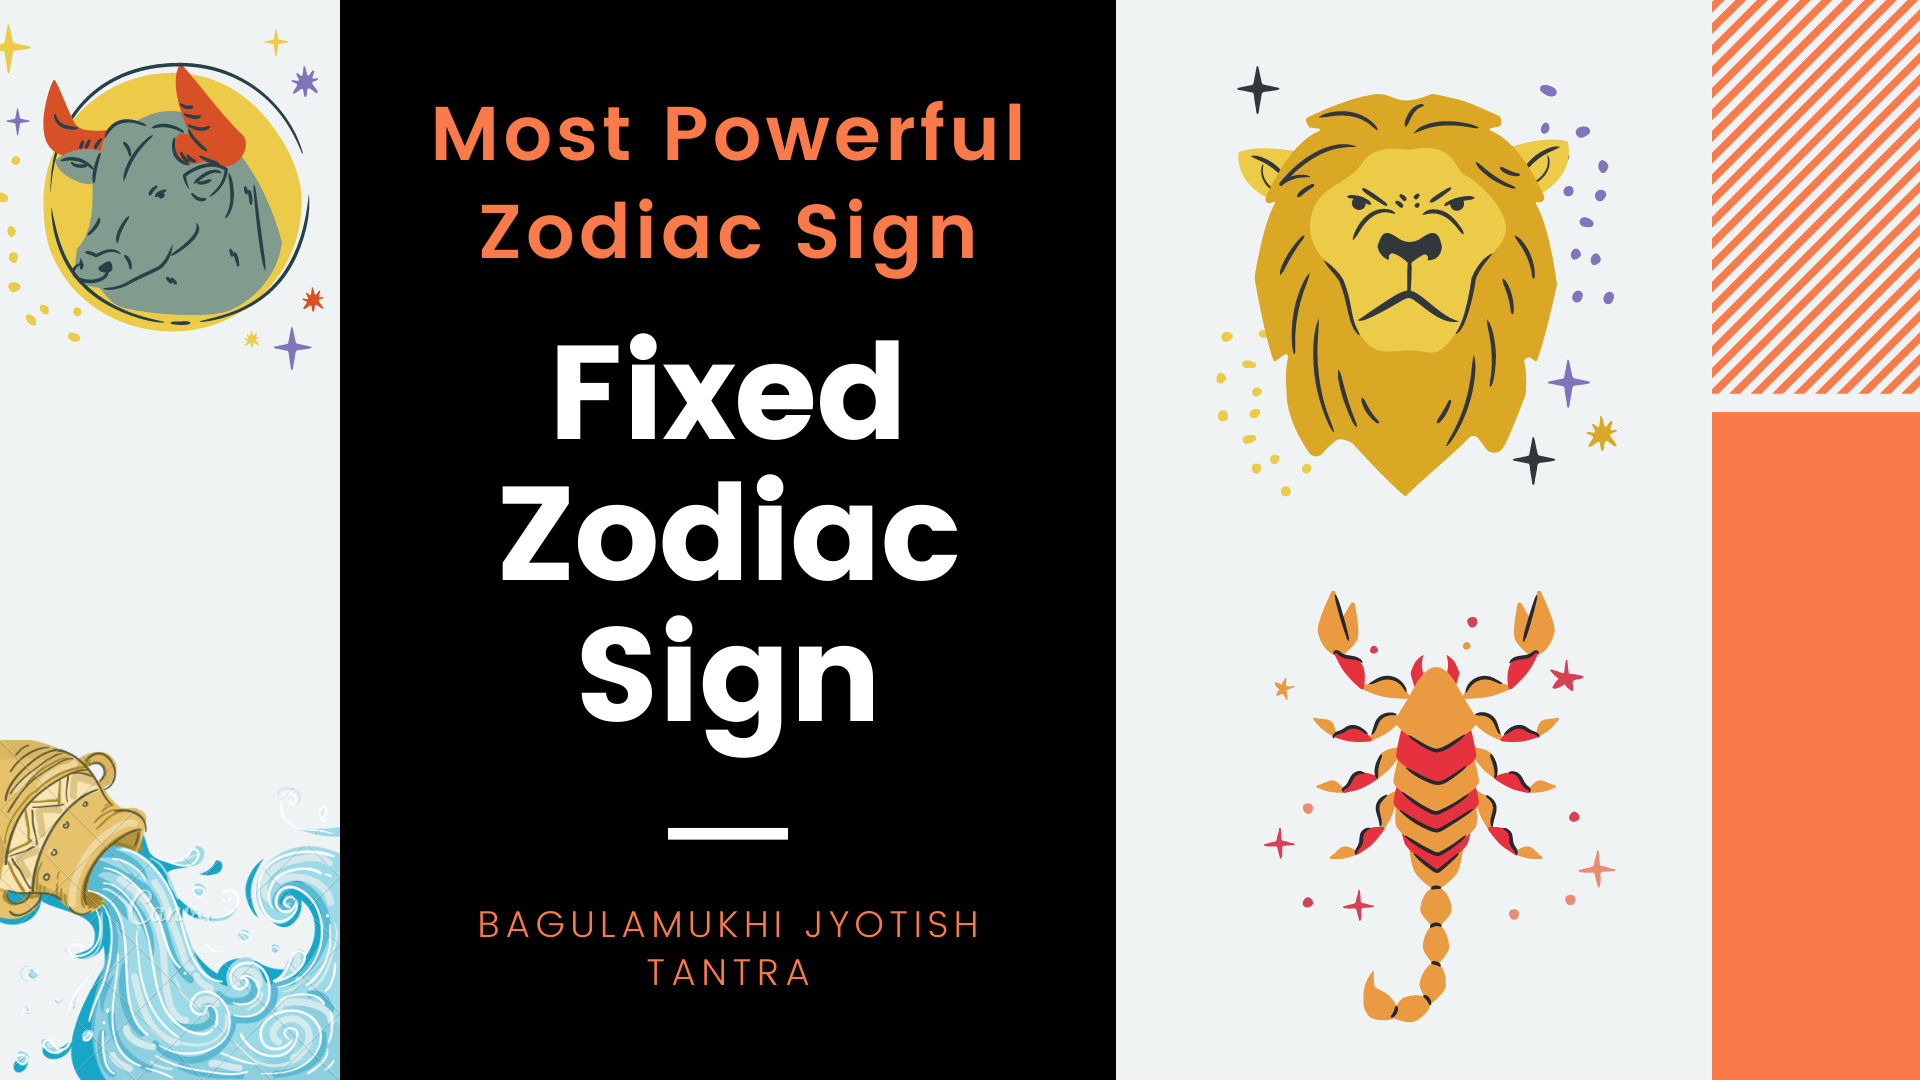 The powerful zodiac sign is most The One